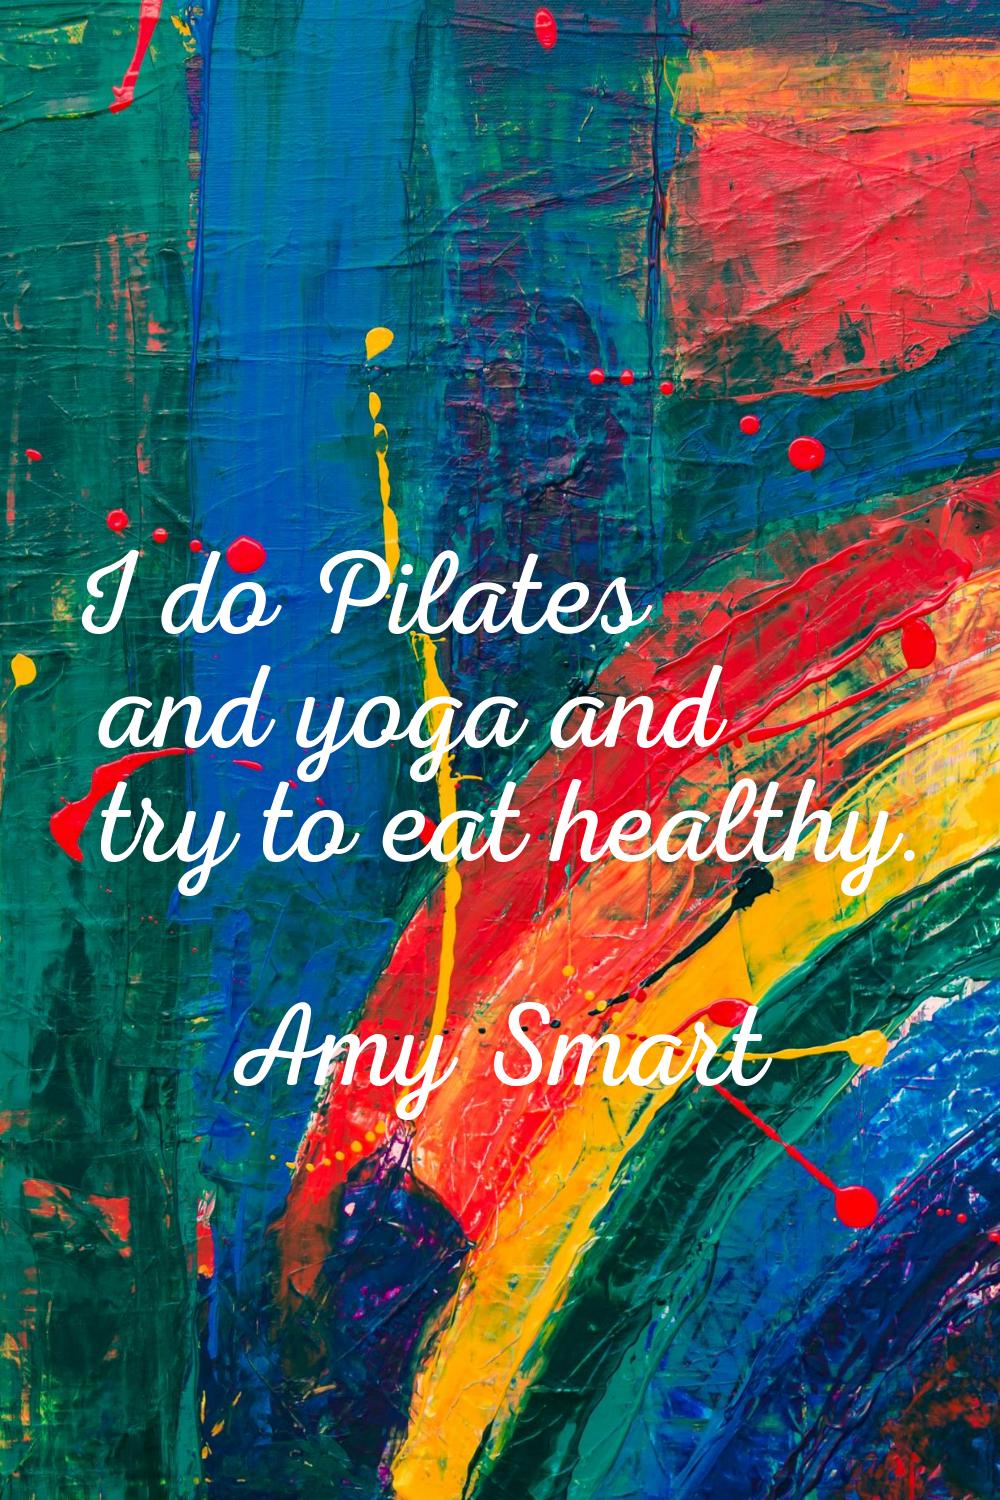 I do Pilates and yoga and try to eat healthy.